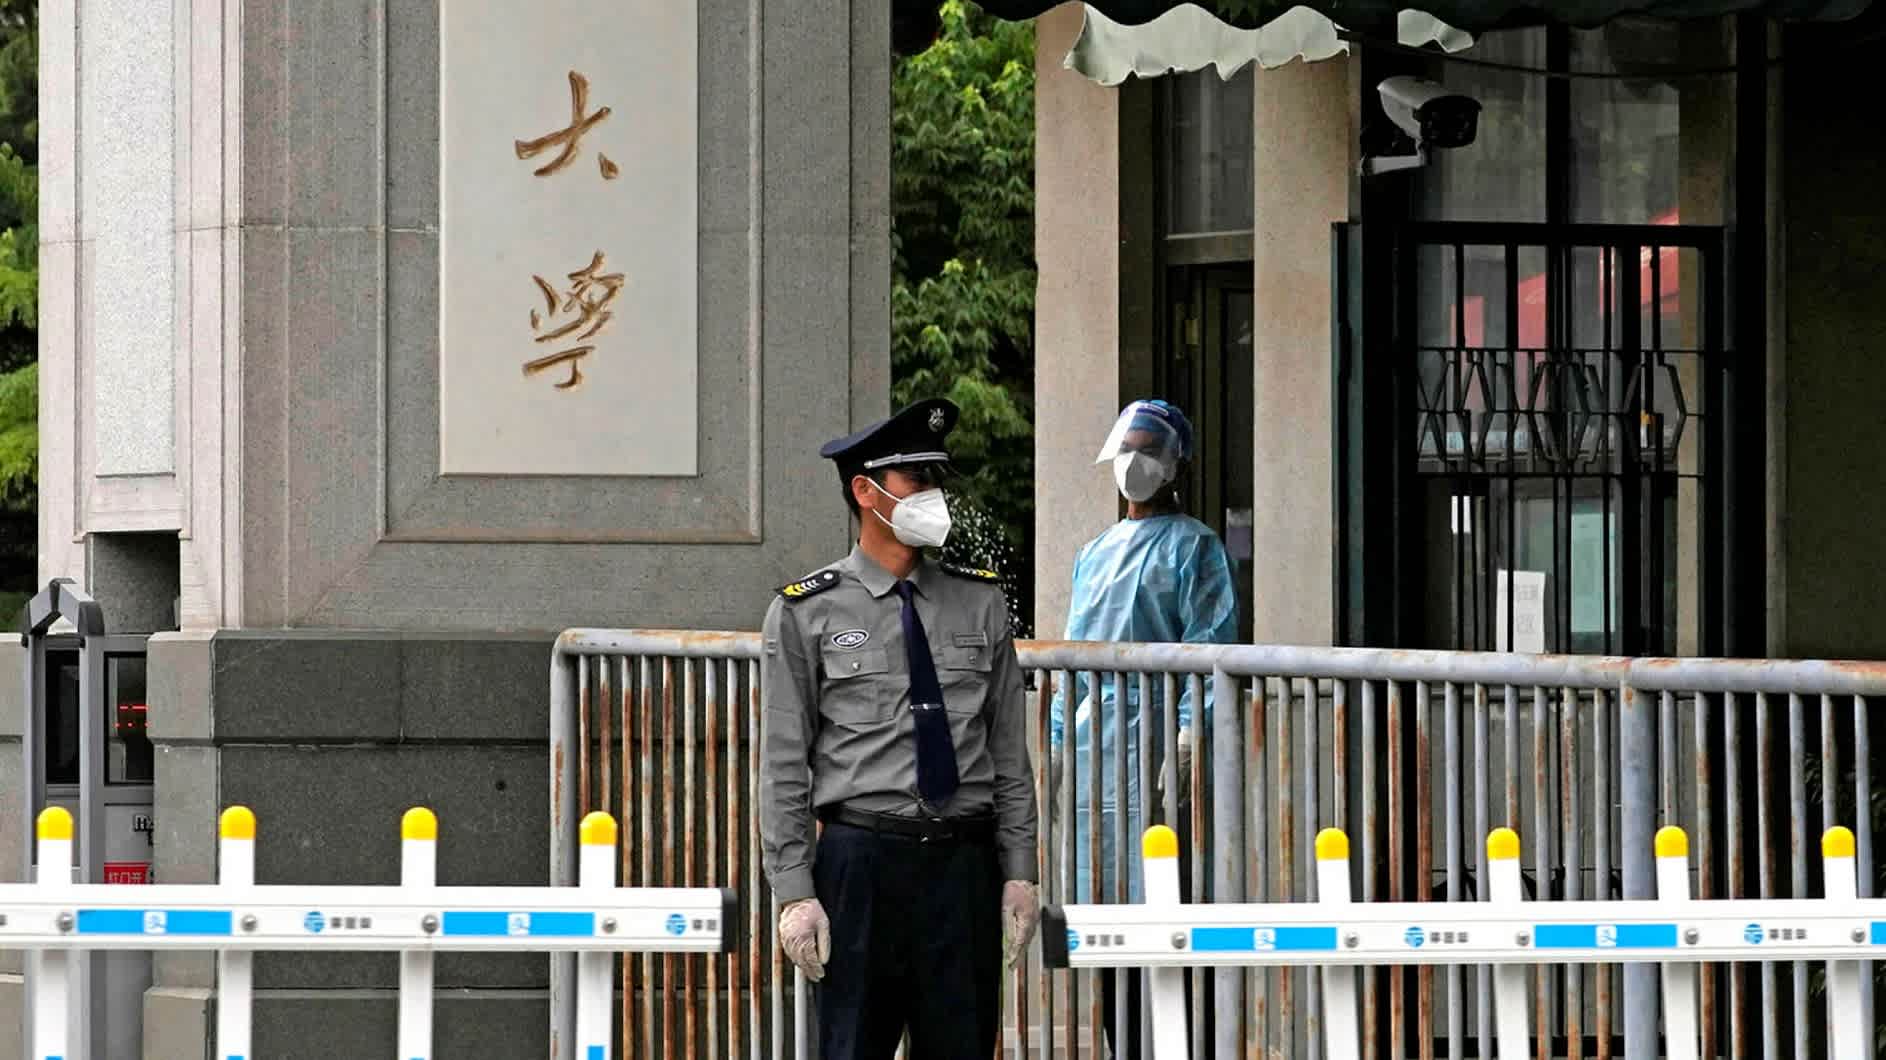 Beijing clamps down on elite students after lockdown protests